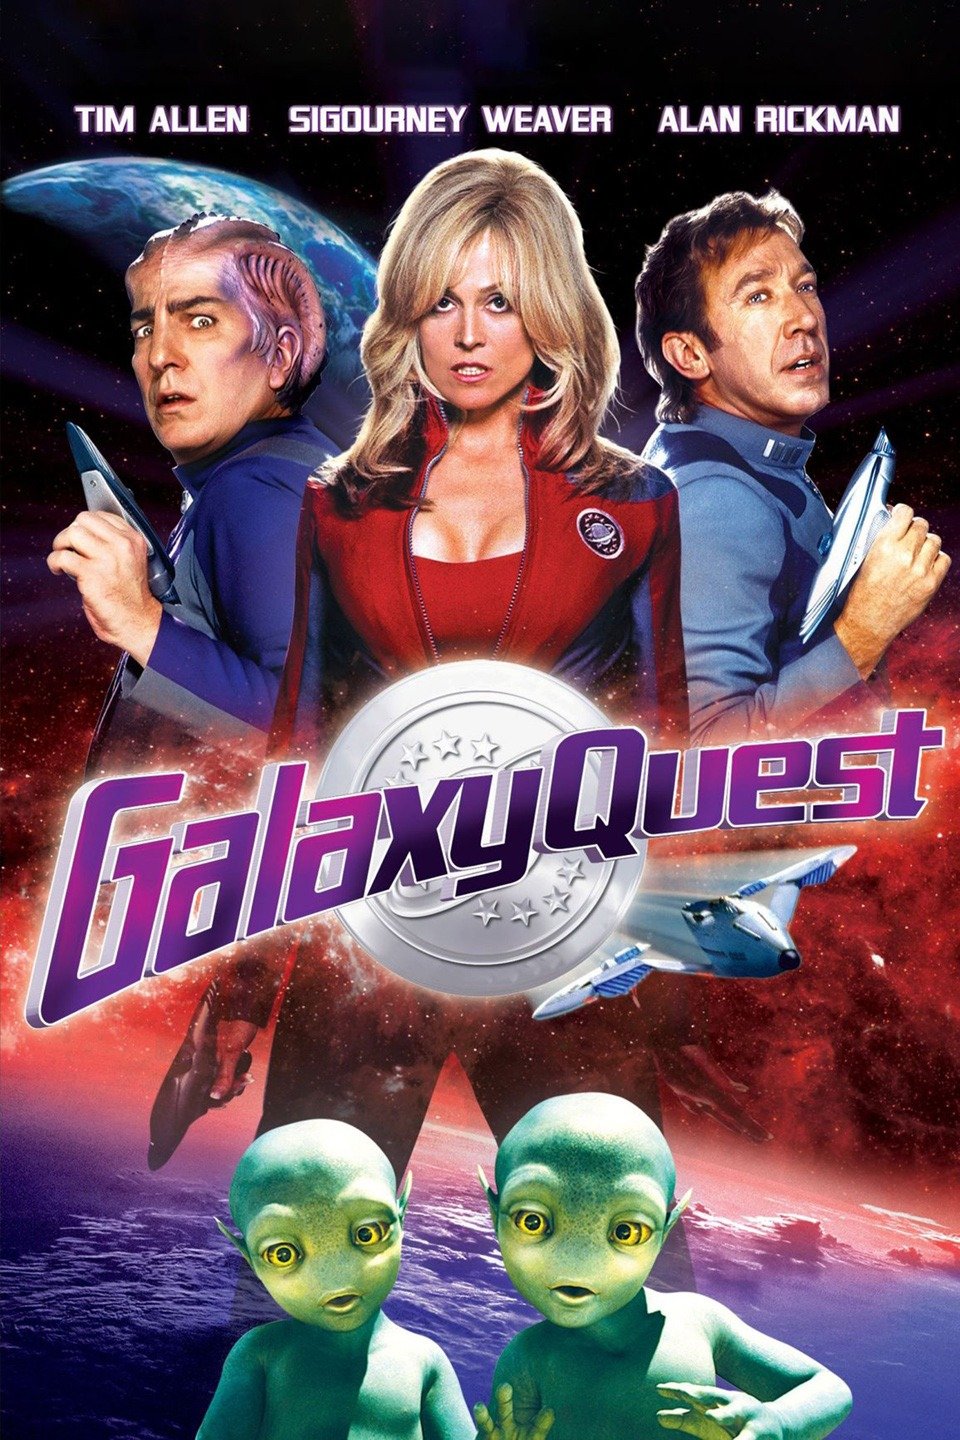 16 90s Sci-FI Movies That Were Mostly Forgettable But Are Still Loved By Many Galaxy Quest (1999) - Rotten Tomatoes